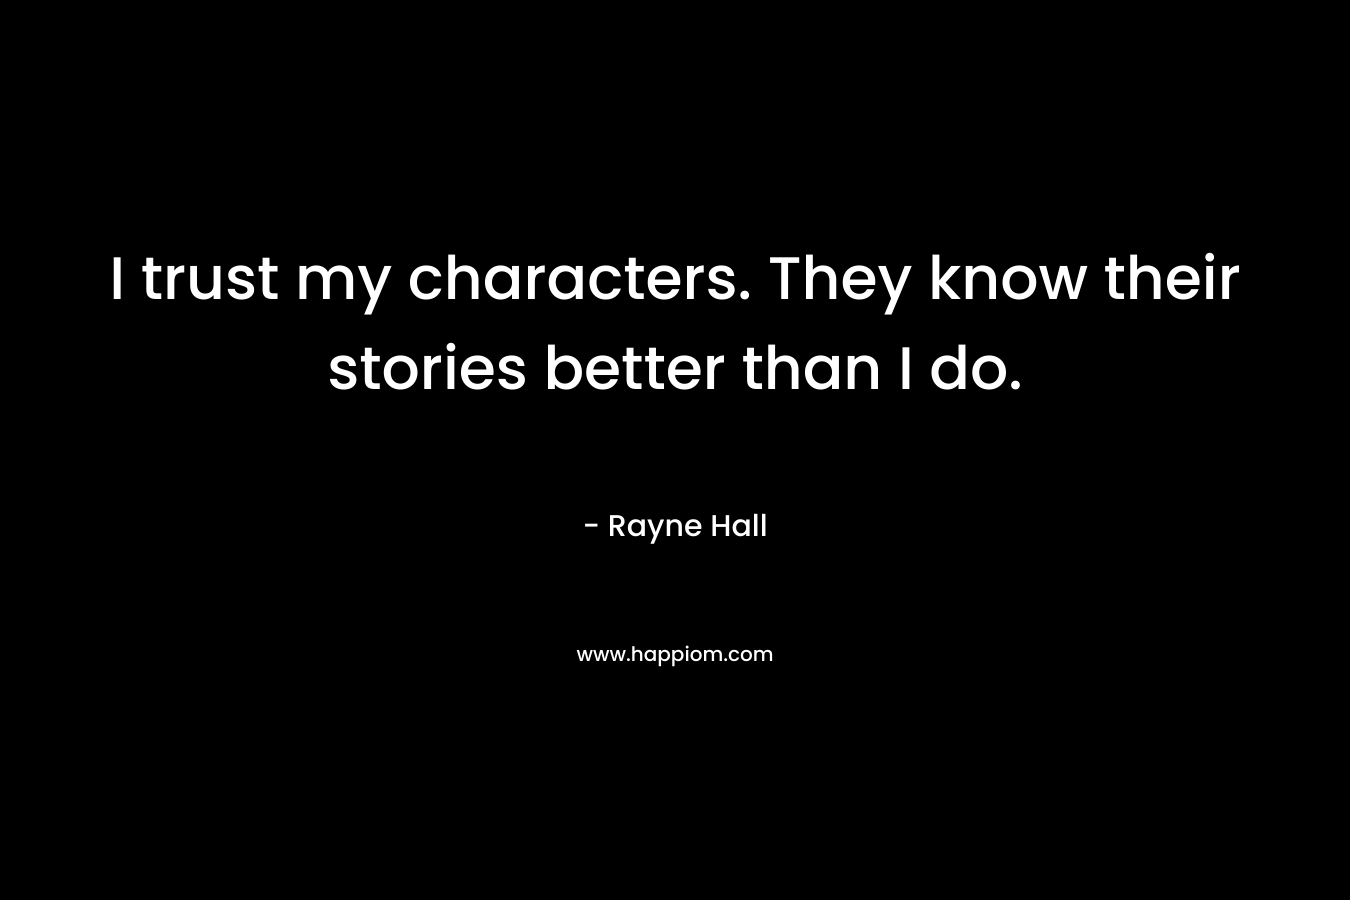 I trust my characters. They know their stories better than I do.